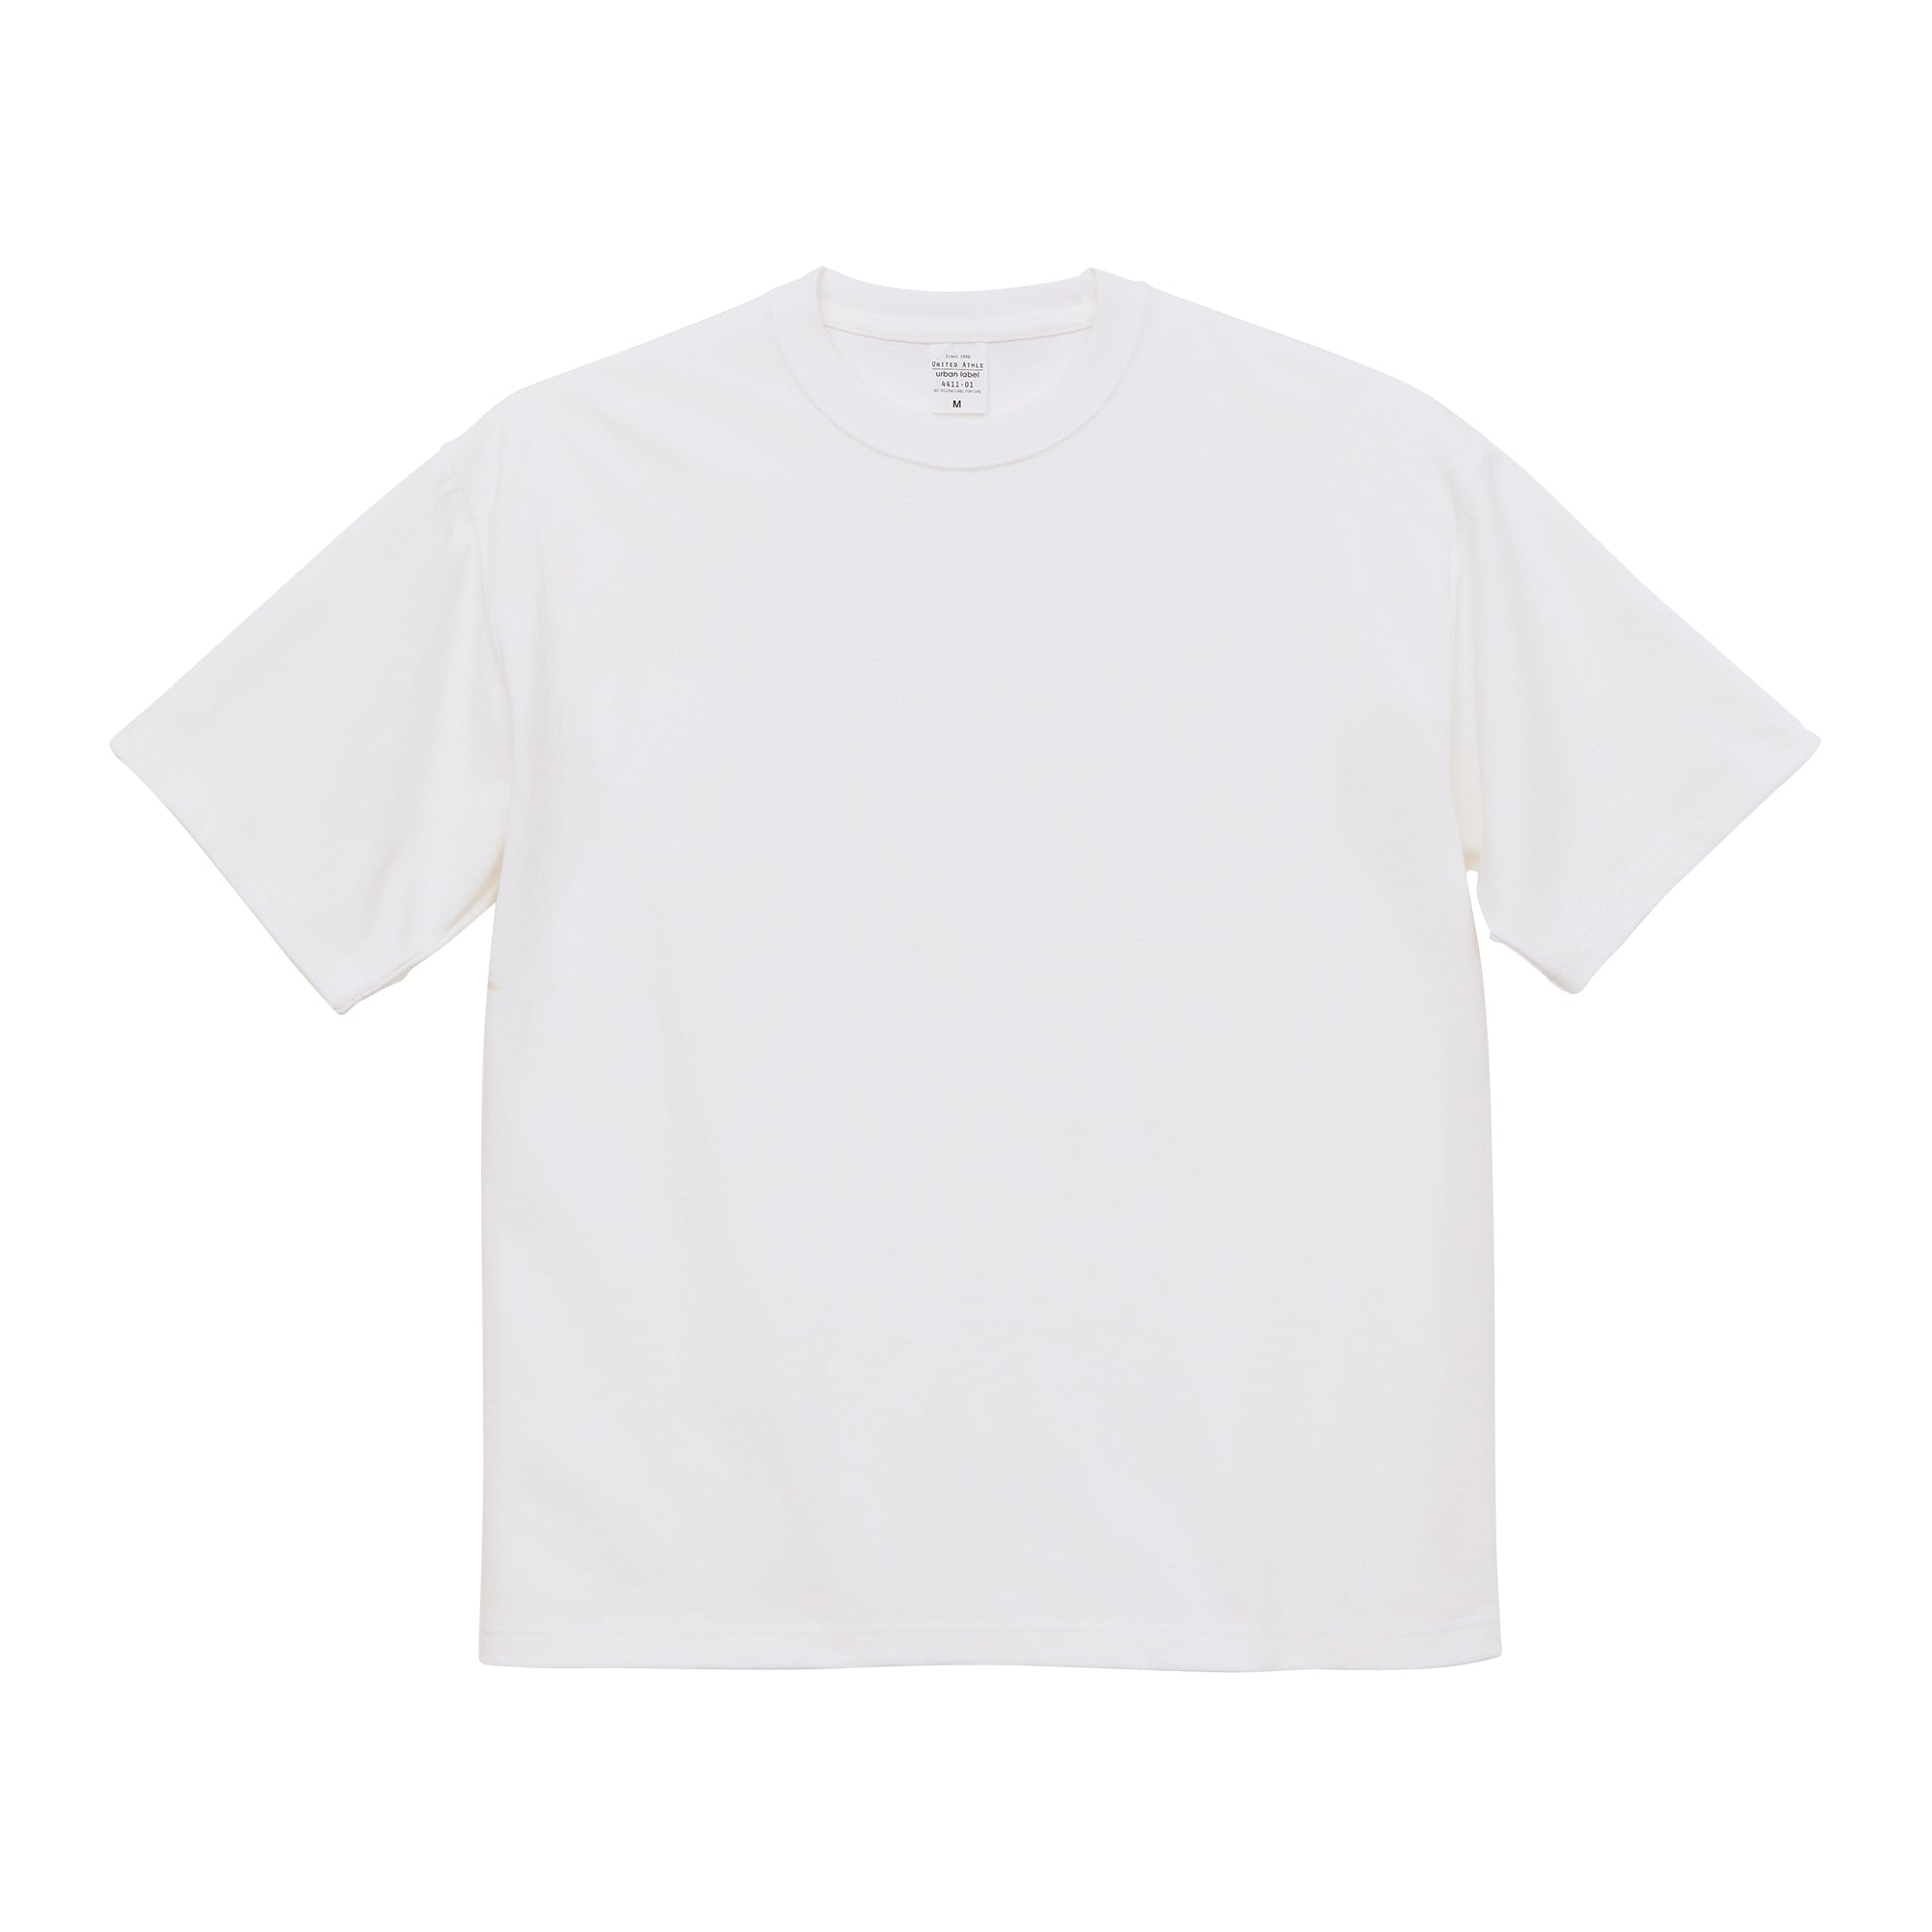 4411 - Magnum Weight 9.1 oz Wide Fit T-shirt - White